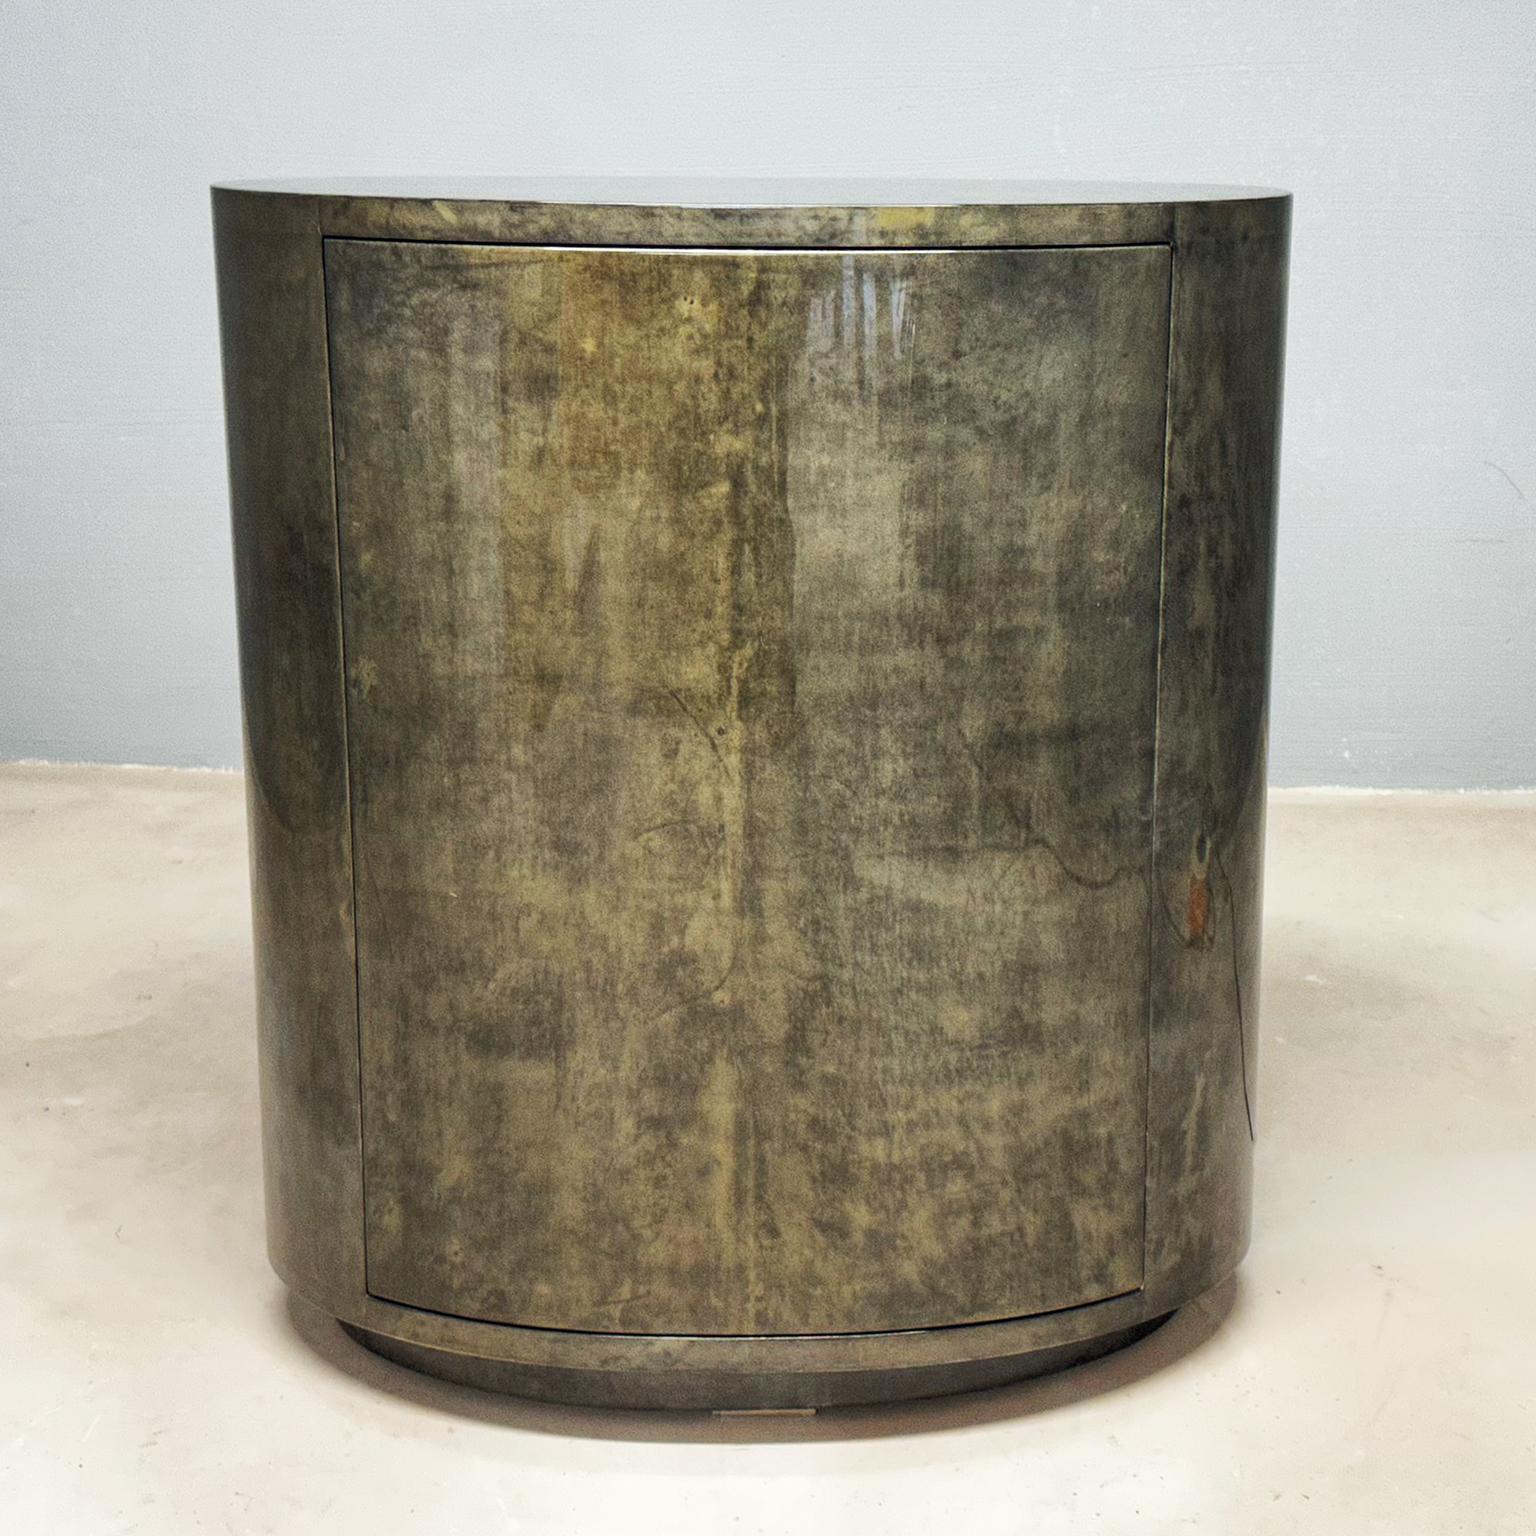 Very rare and magnificent Aldo Tura goatskin oval bar cabinet in a wonderful grey green muddy color was designed in Italy, circa 1970s. The exceptional clear small bar cabinet is illuminated and mirrored inside with an oval glass shelfs, has an